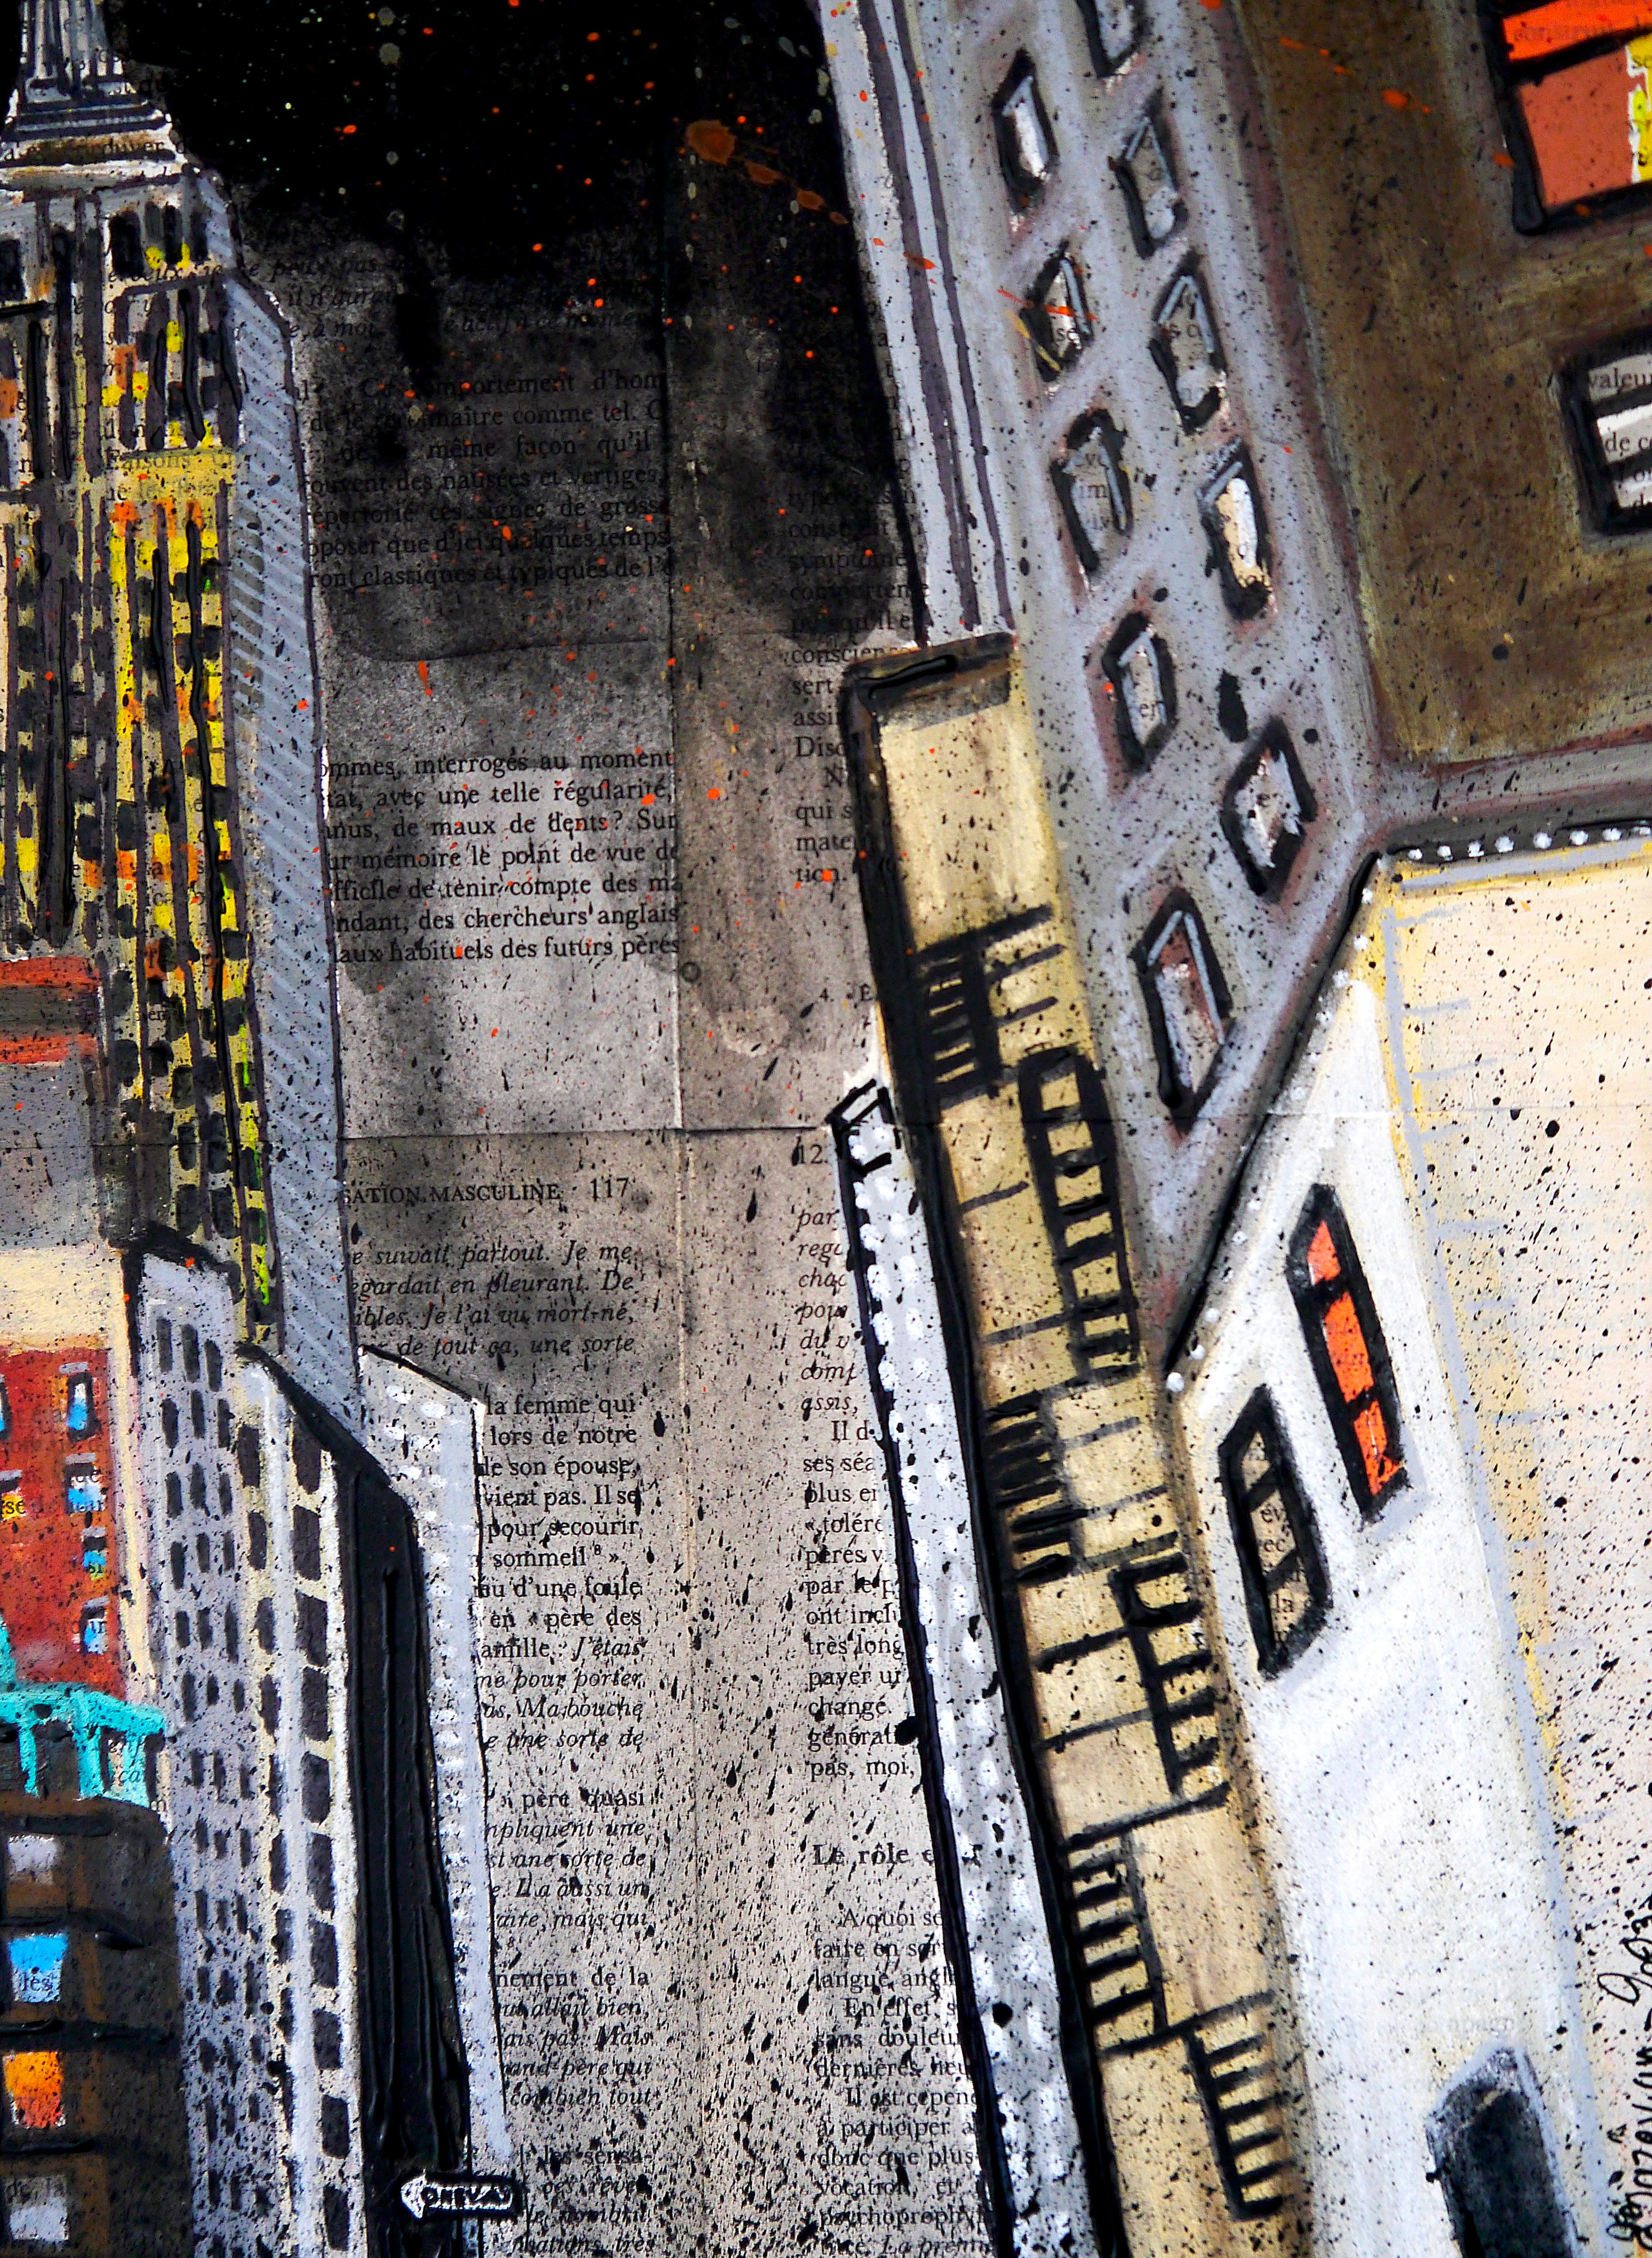 New York City - Empire State Building

Landscape - Sky scrappers, office- NYC Building Painting
Technique: oil, acrylic, and ink on old book pages on wooden frame 40x40cm ■■ 15,7x15,7 inch

》》R E A D Y -- T O -- H A N G《《



❶ → Original signed